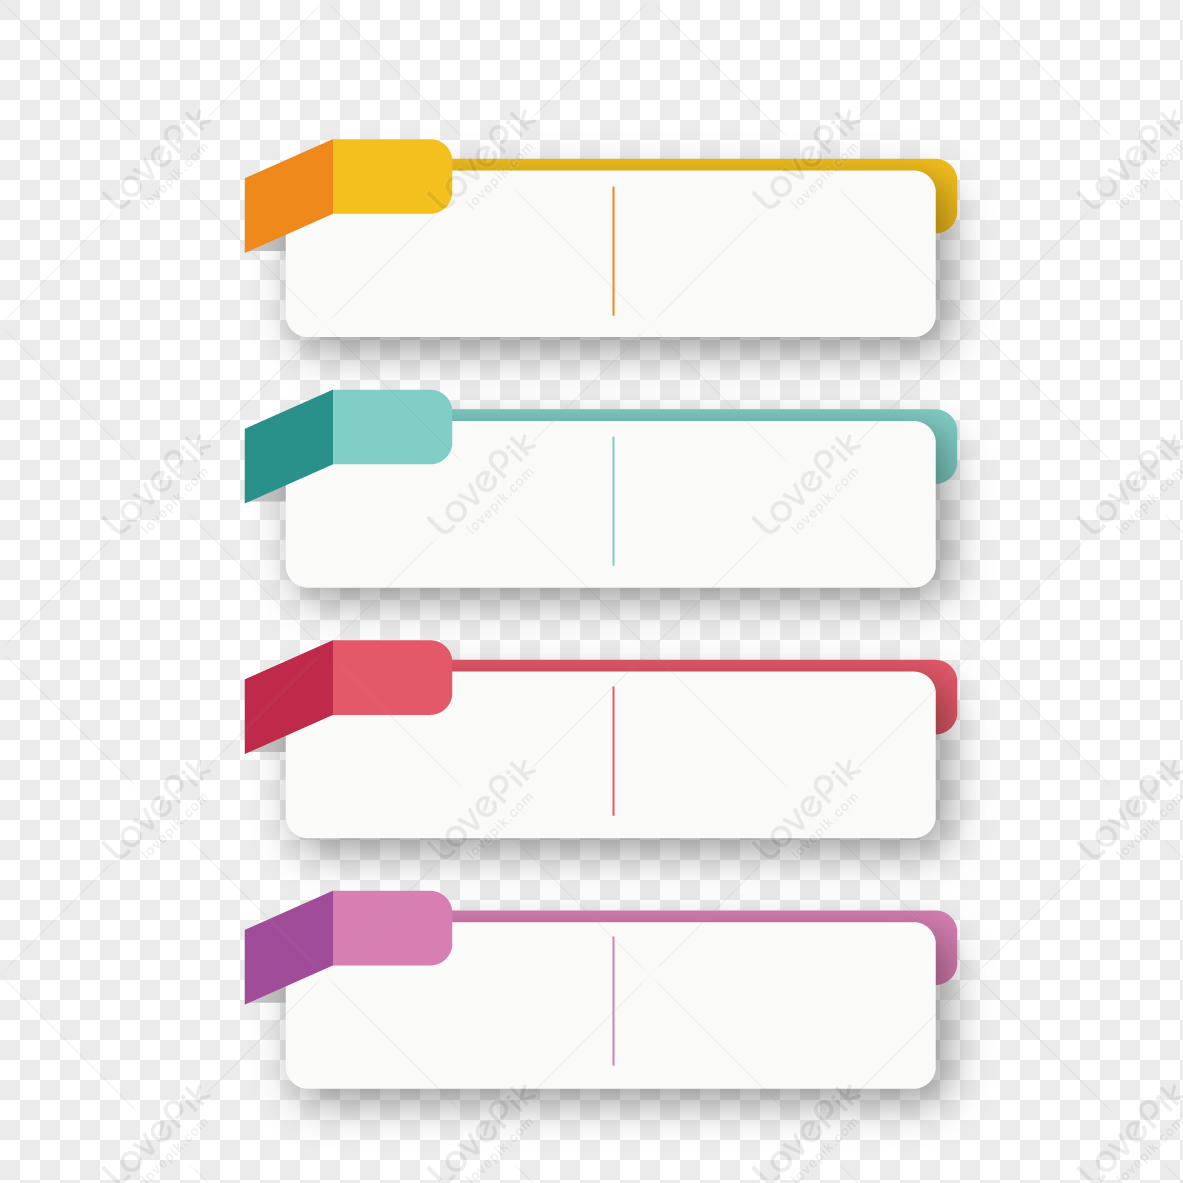 PPT tags, ppt, sequence, labels png transparent image